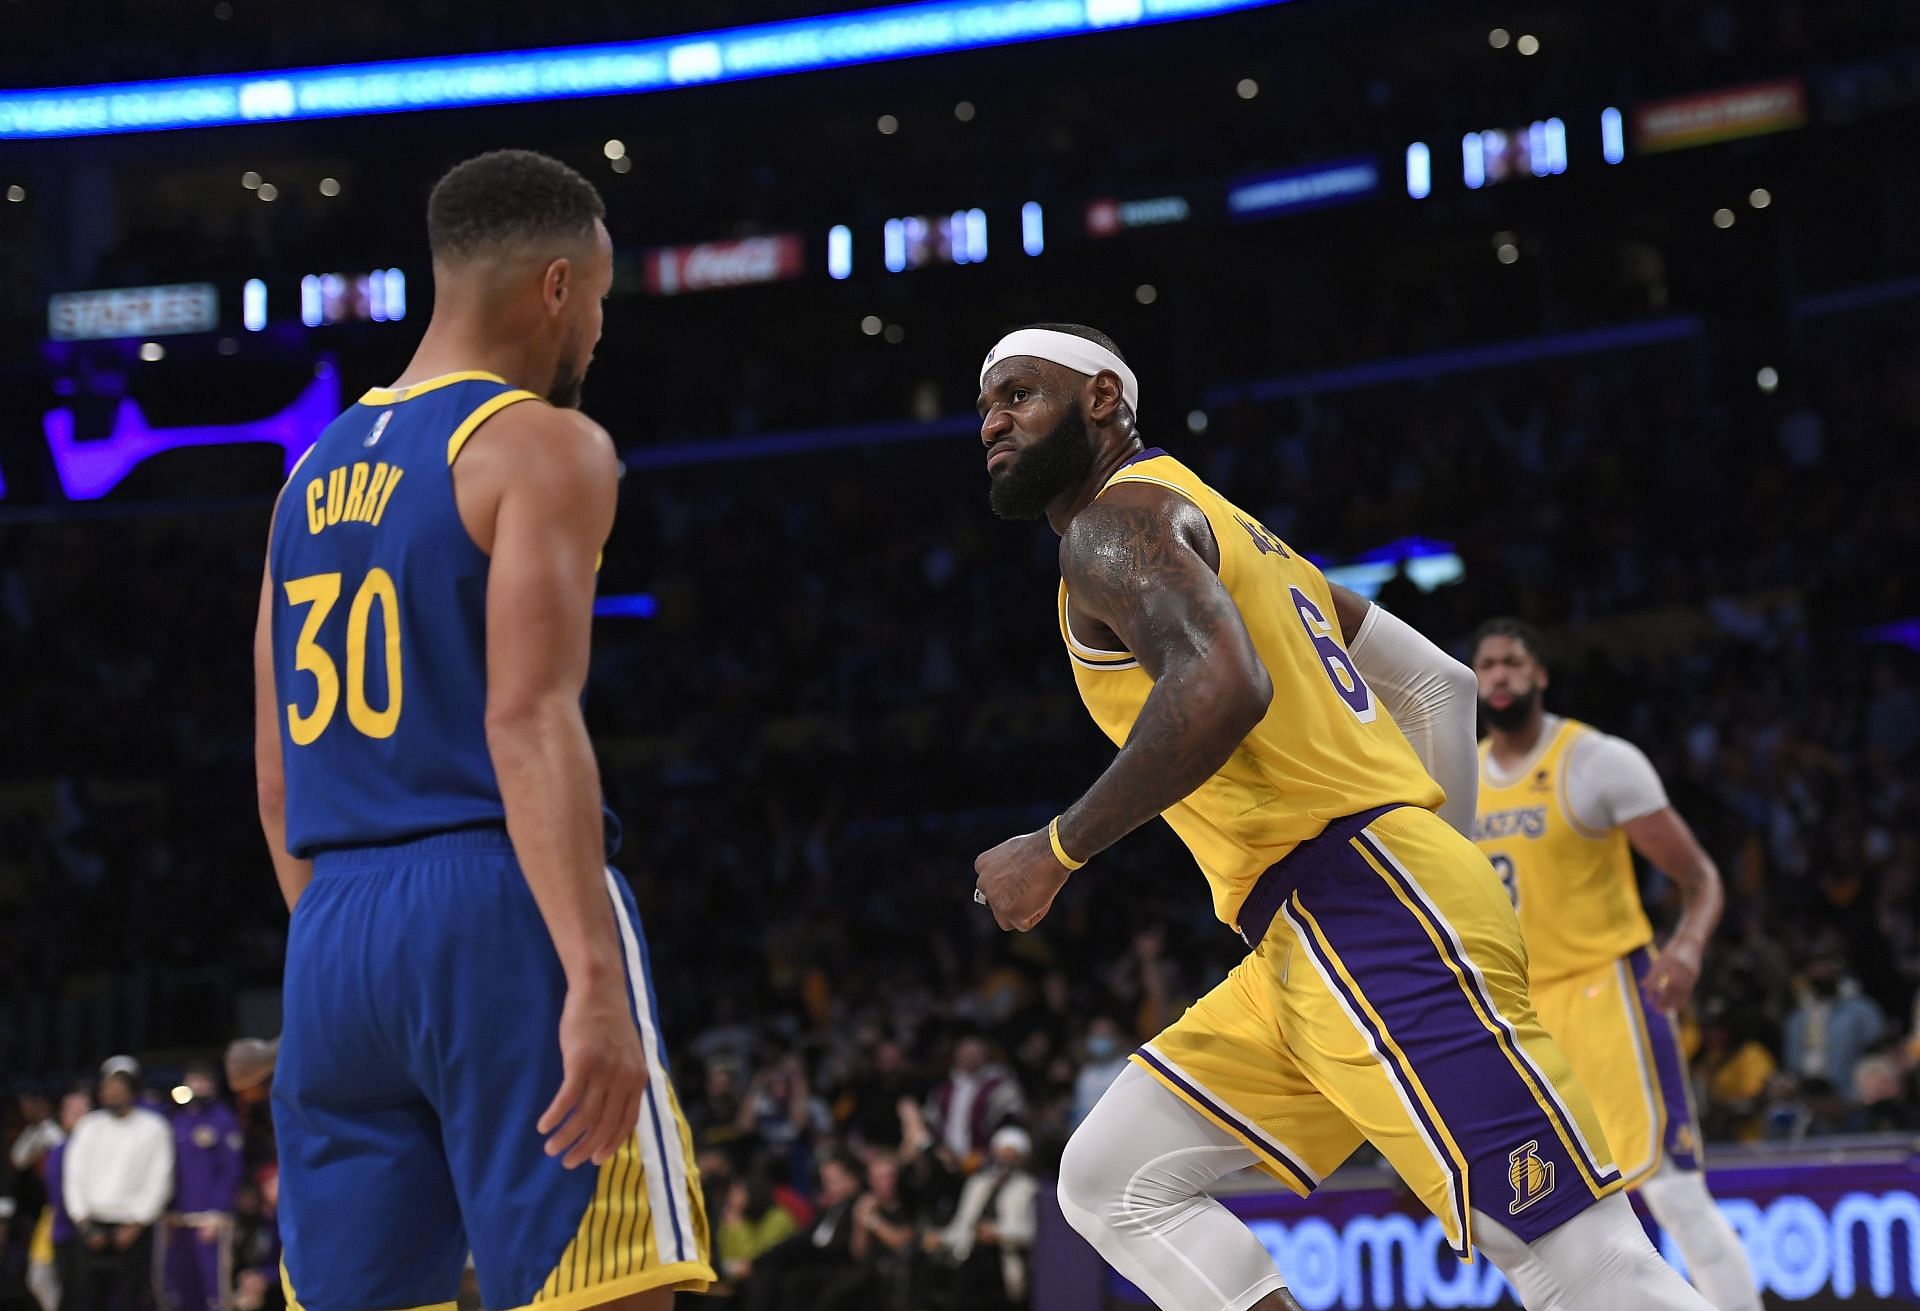 Thanks to the Warriors &#039; depth, Curry could win more championships and pass LeBron James.